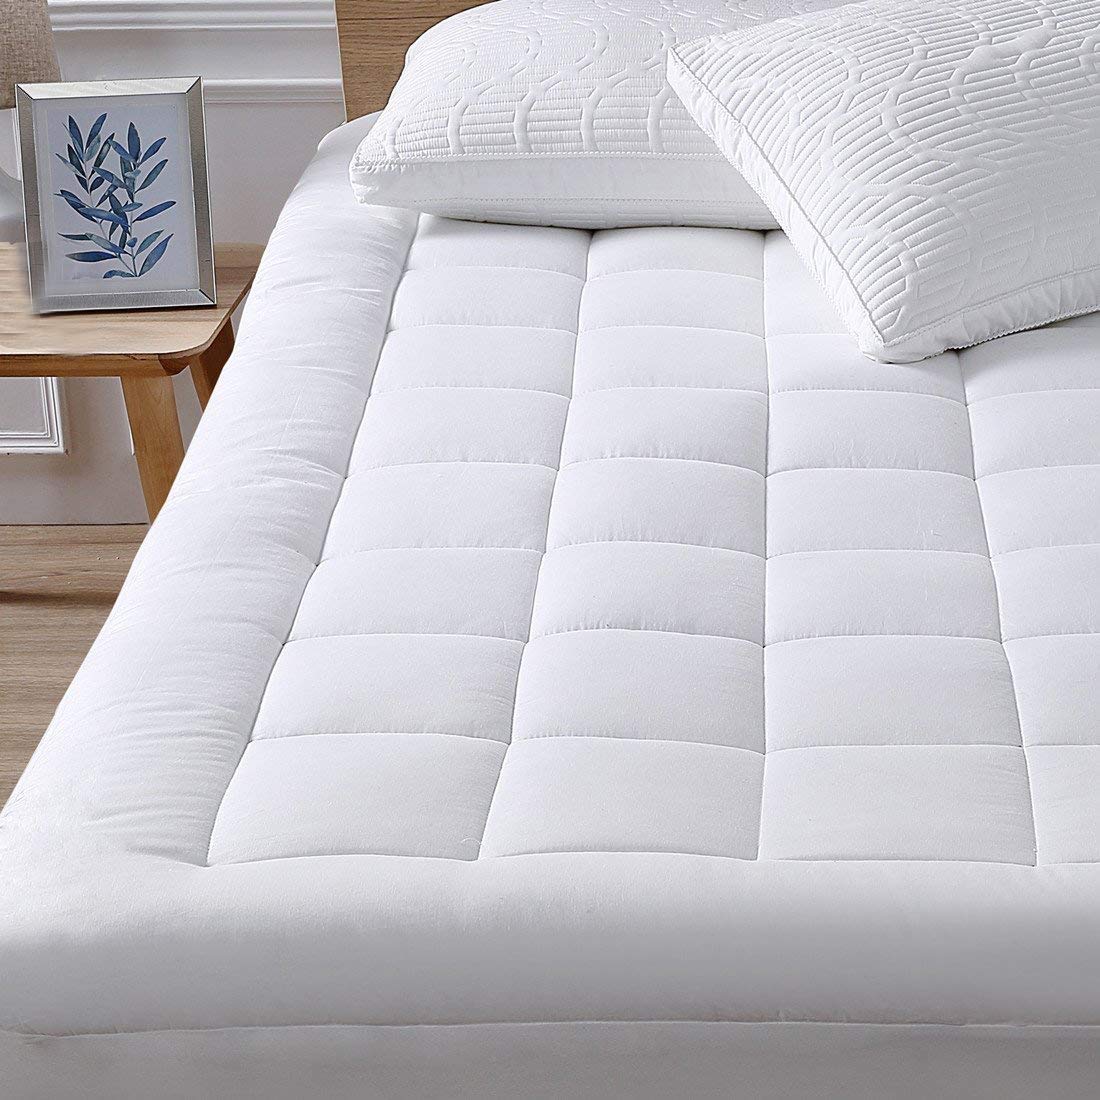 oaskys Skin-Friendly Fluffy Mattress Pad Cover